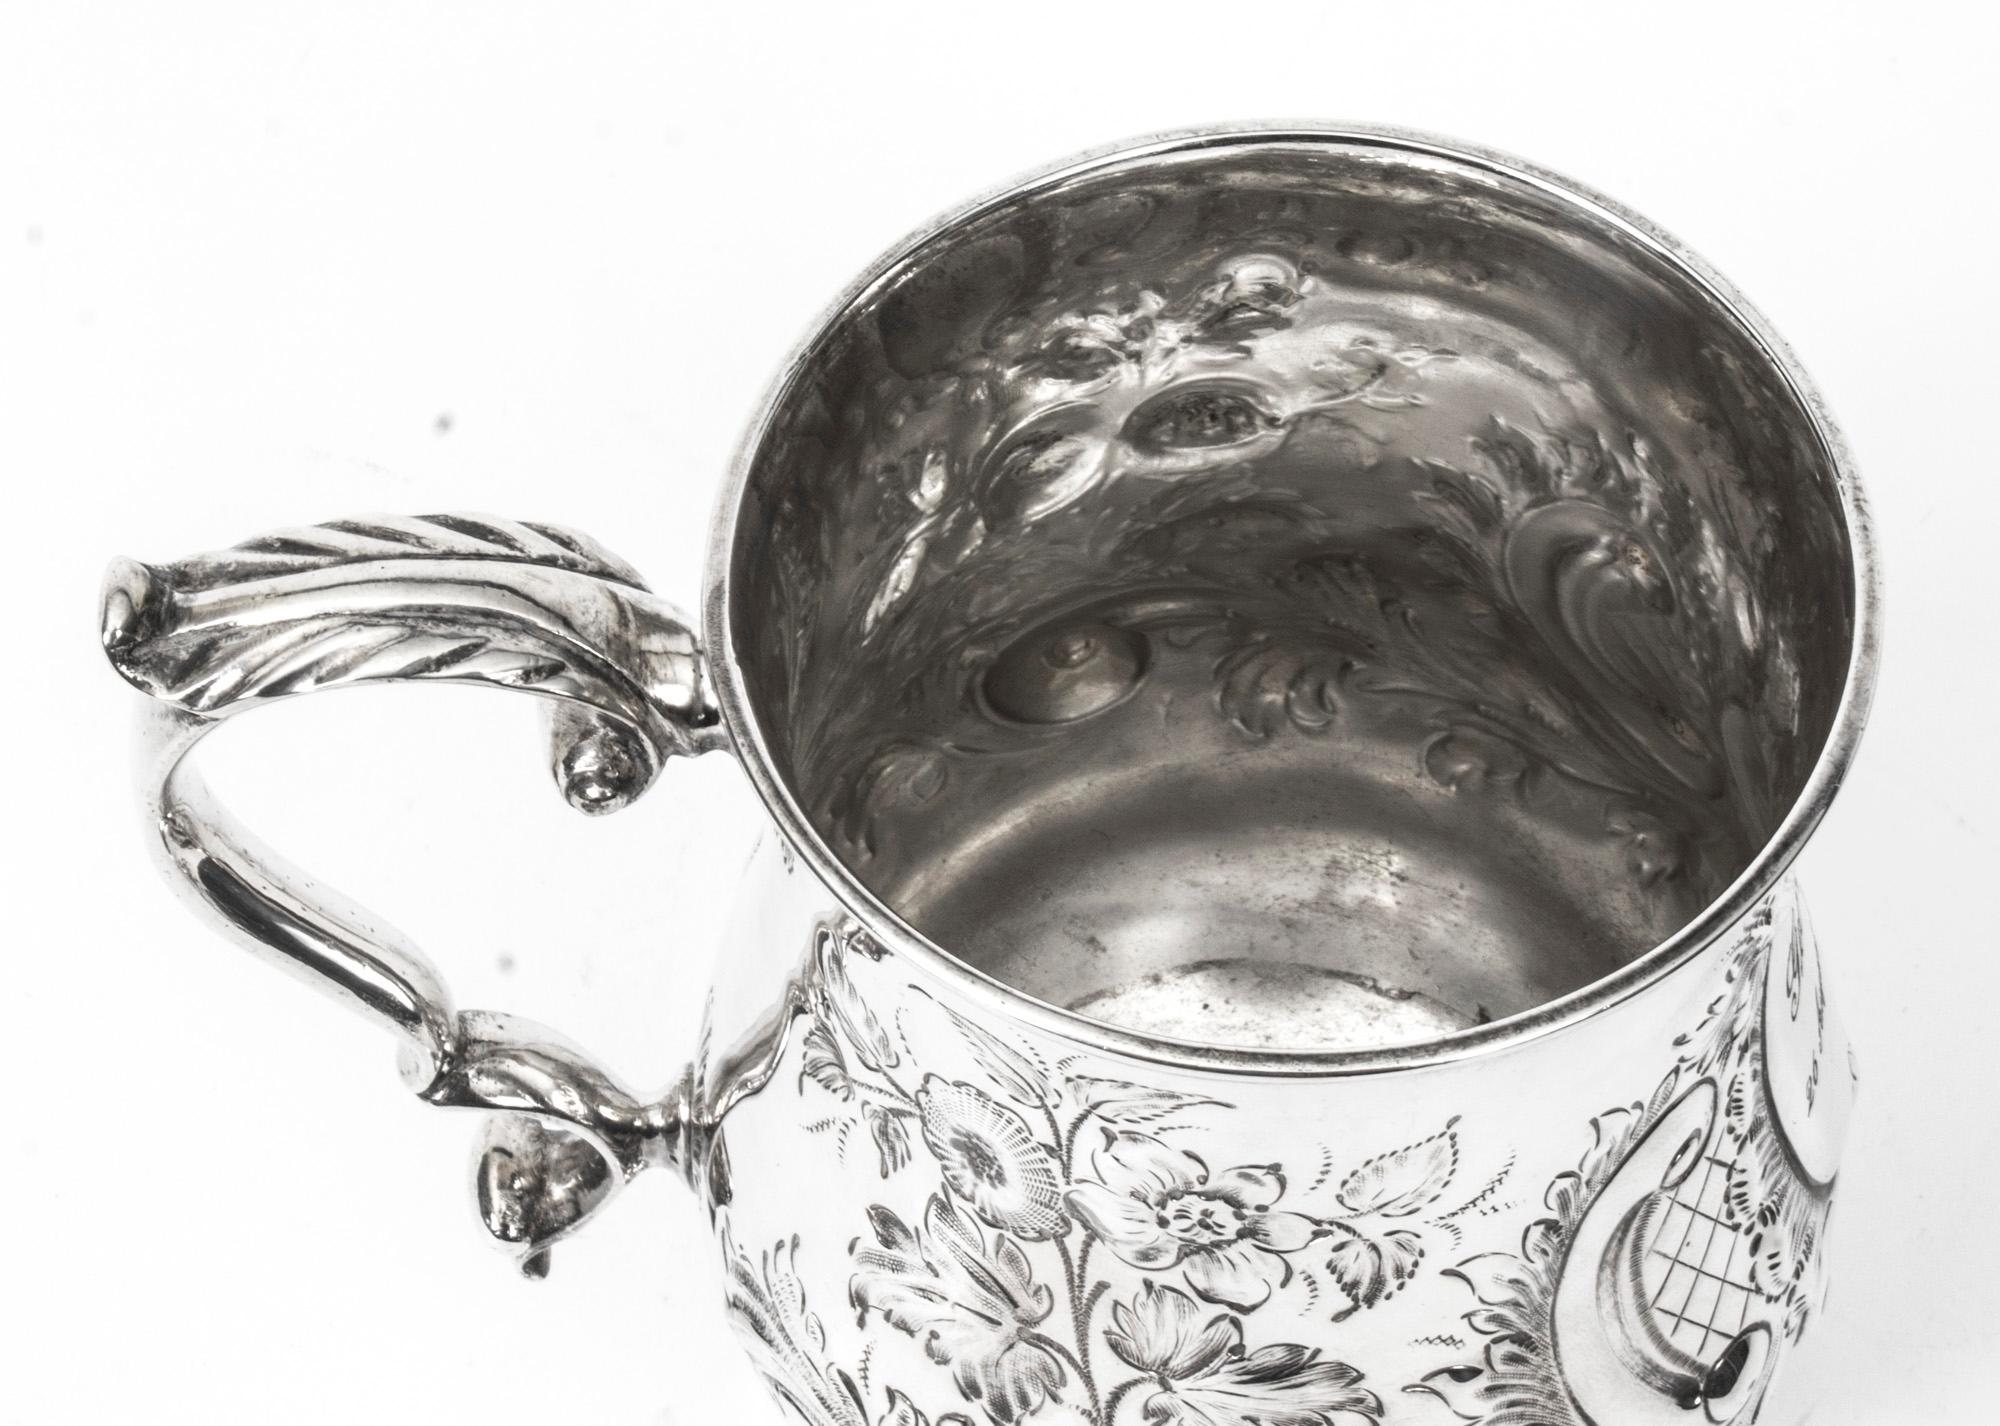 This is a delightful antique Victorian English silver plated engraved and embossed mug, circa 1870 in date.

Condition:
In excellent condition, please see photos for confirmation.

Dimensions in cm:
Height 13 x Width 13 x Depth